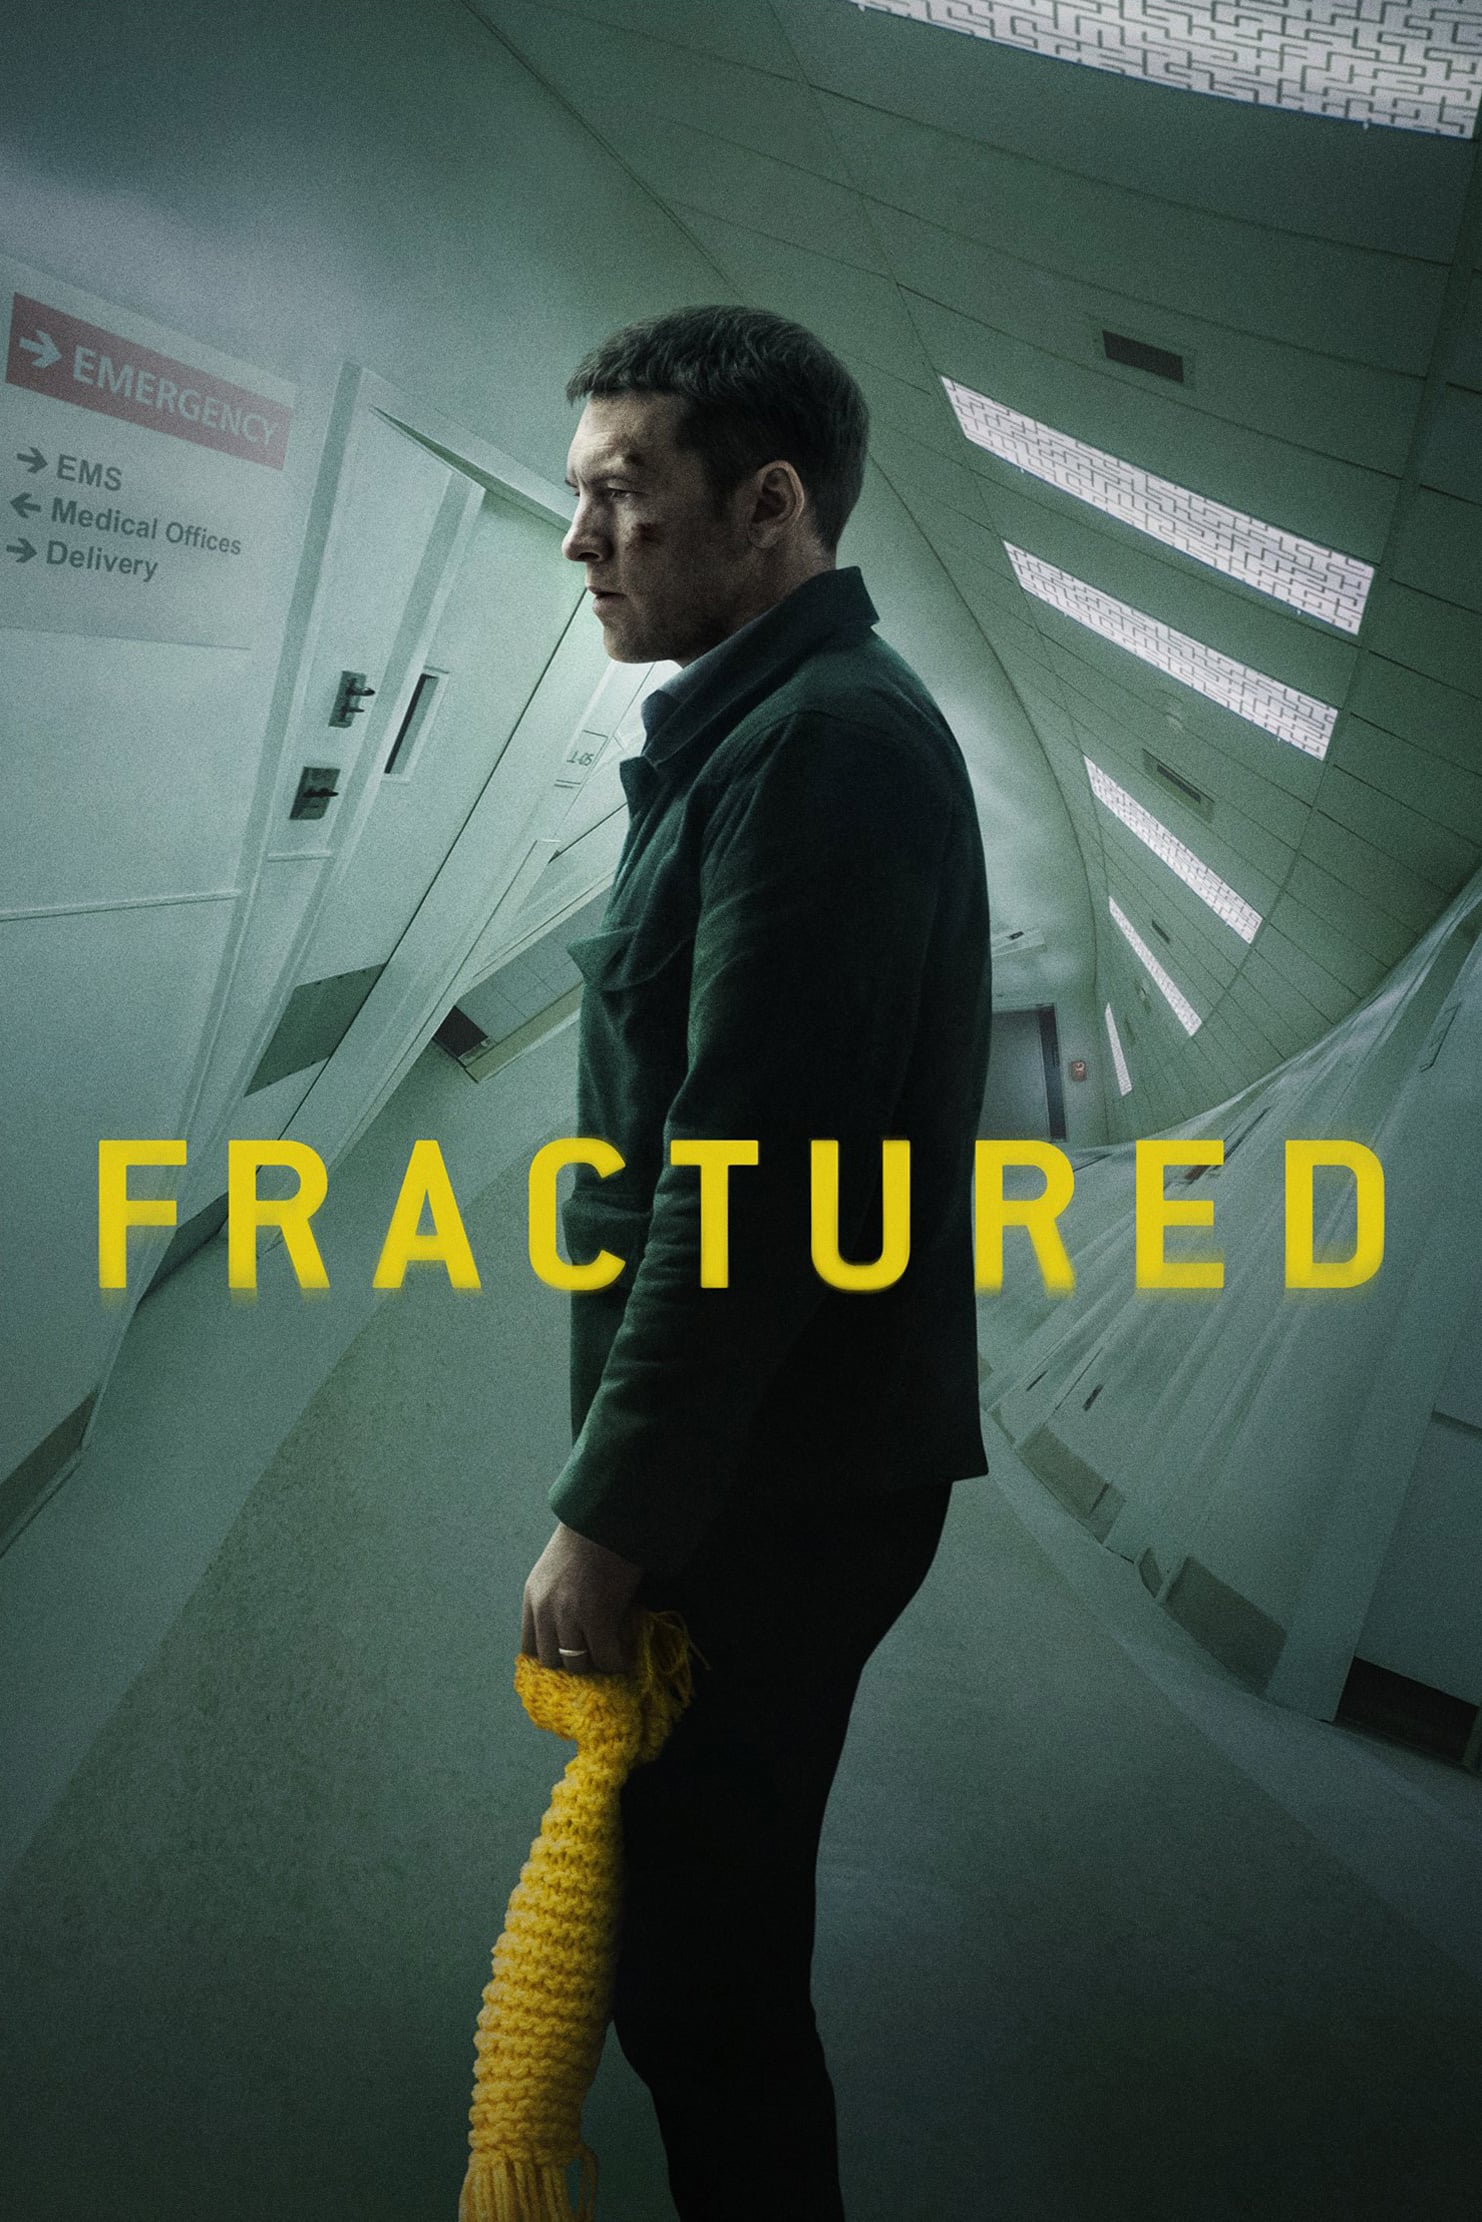 Poster for the movie "Fractured"